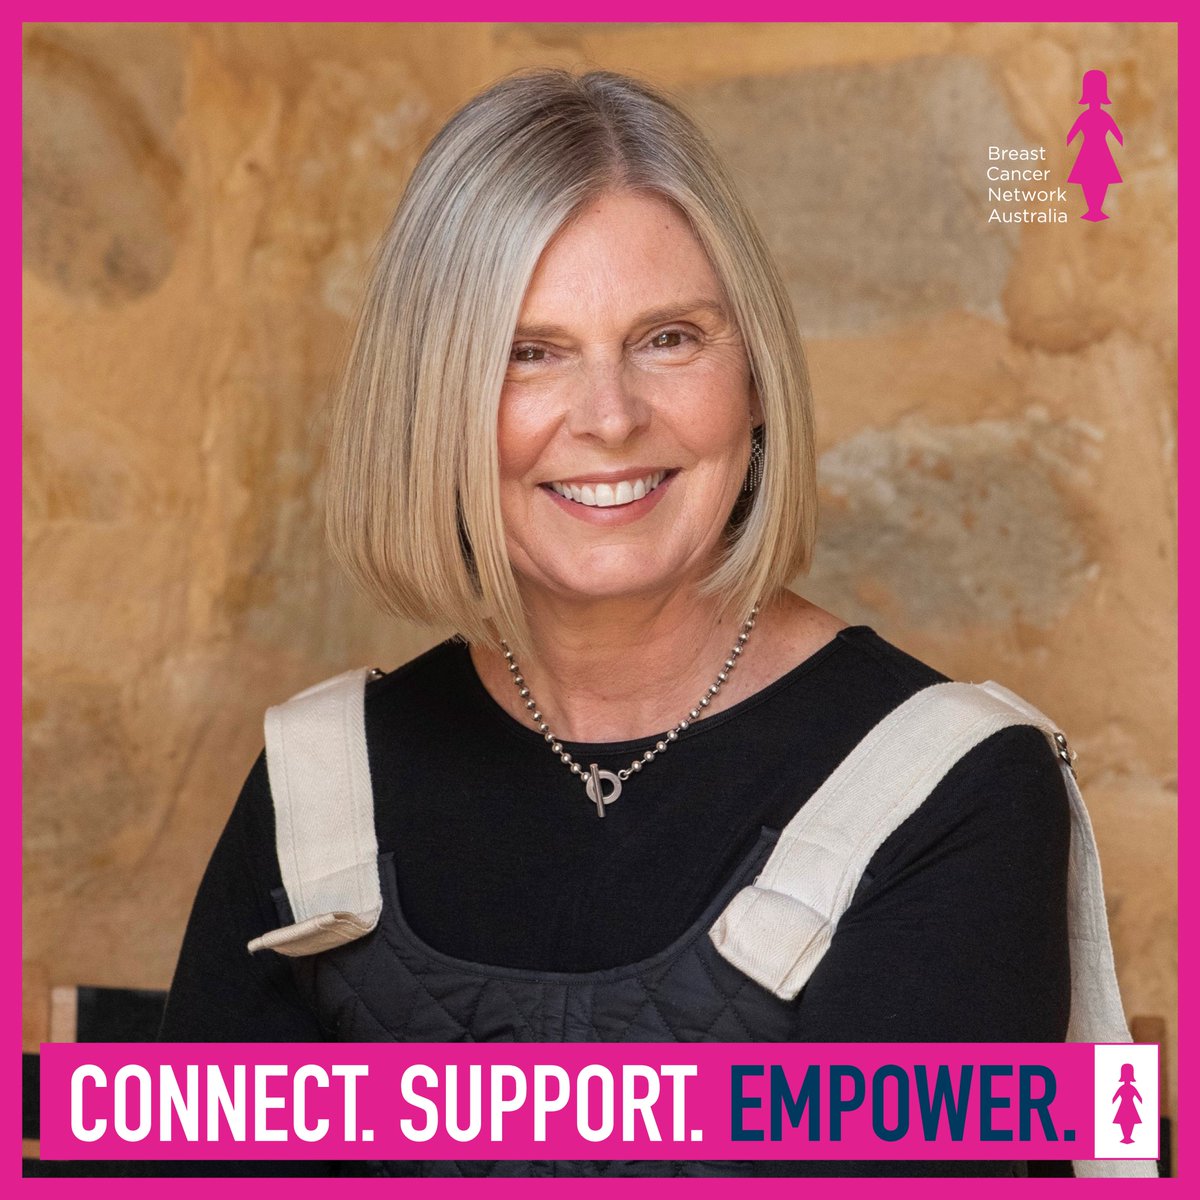 BCNA is Australia’s leading consumer network. This October we are excited to launch a new podcast series, host virtual conferences & advocate to drive change. Join us as we connect, support, and empower this October and beyond!
#BreastCancerAwarenessMonth #ConnectSupportEmpower